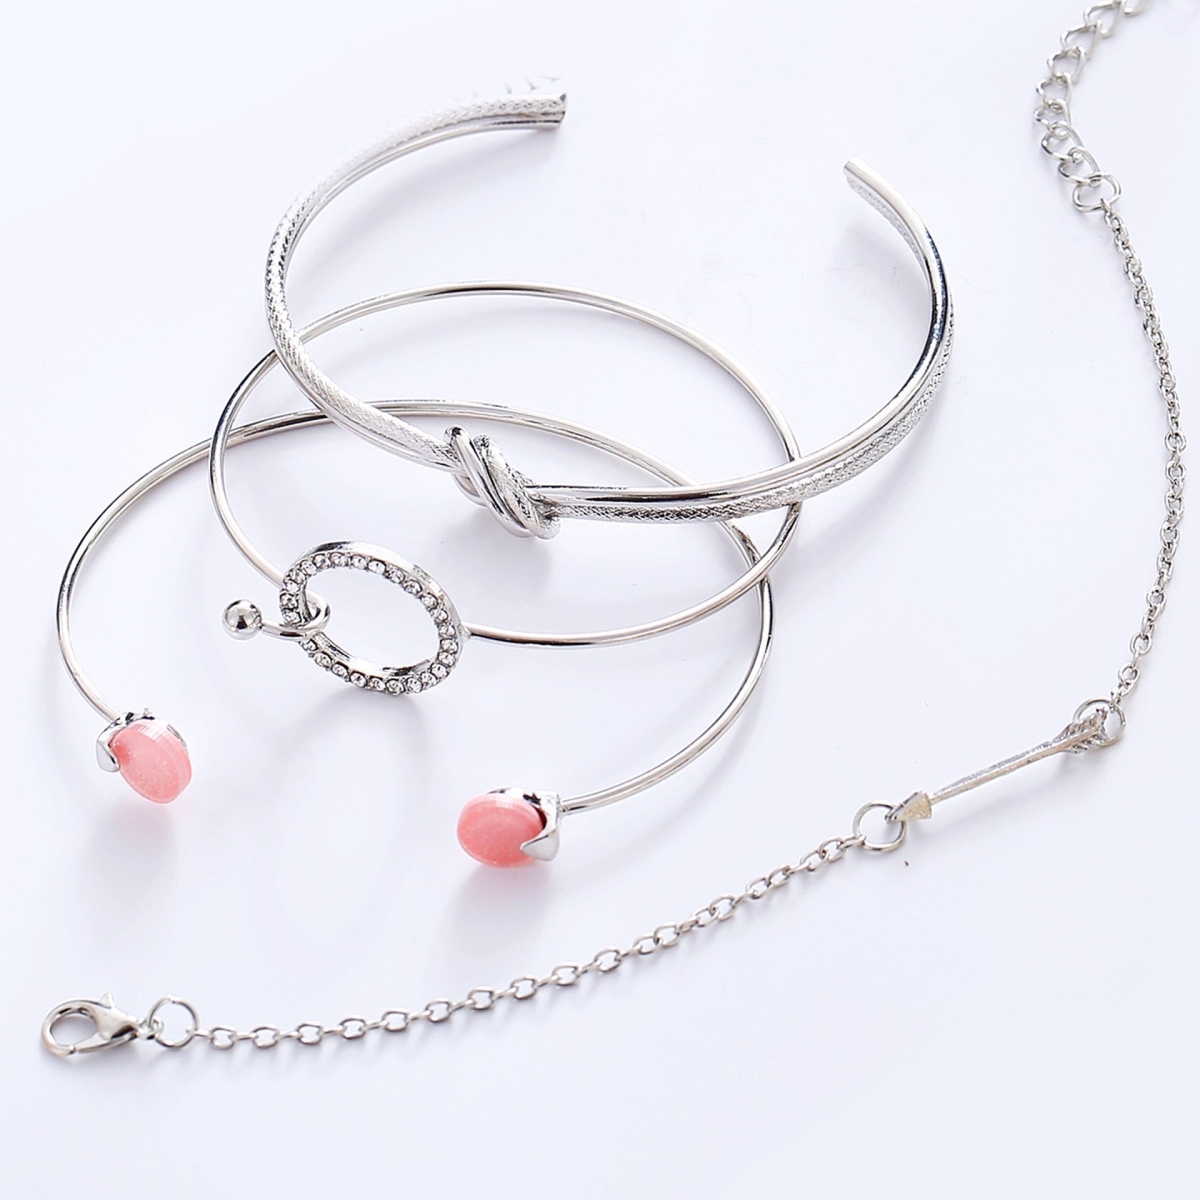 Picture of Alily Jewelry HZS-B0294-SILVER Pink Bracelet Set with Austrian Crystals in 18K White Gold Plated - 4 Piece